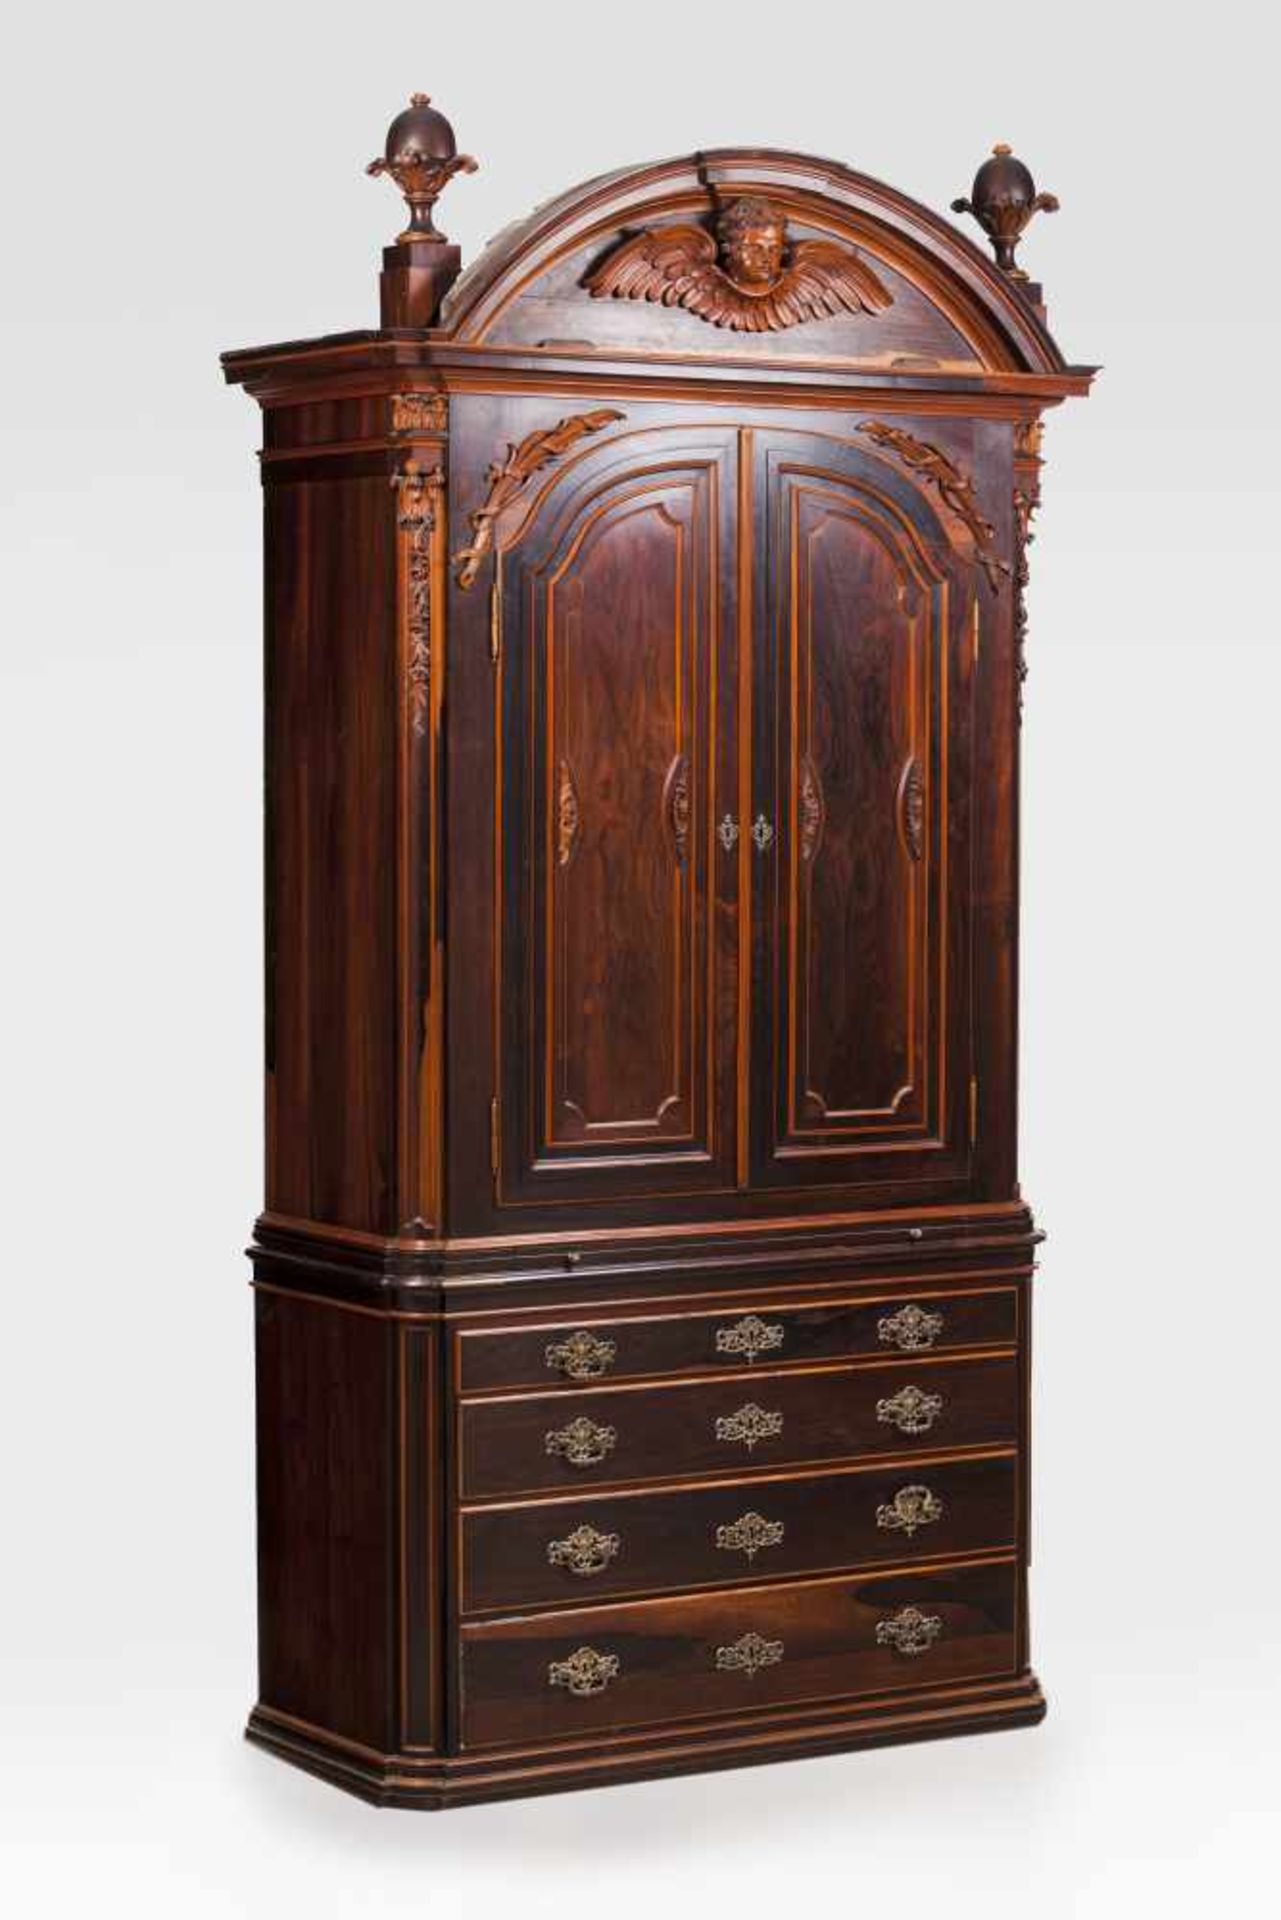 A large D.Maria chest of drawers/oratory